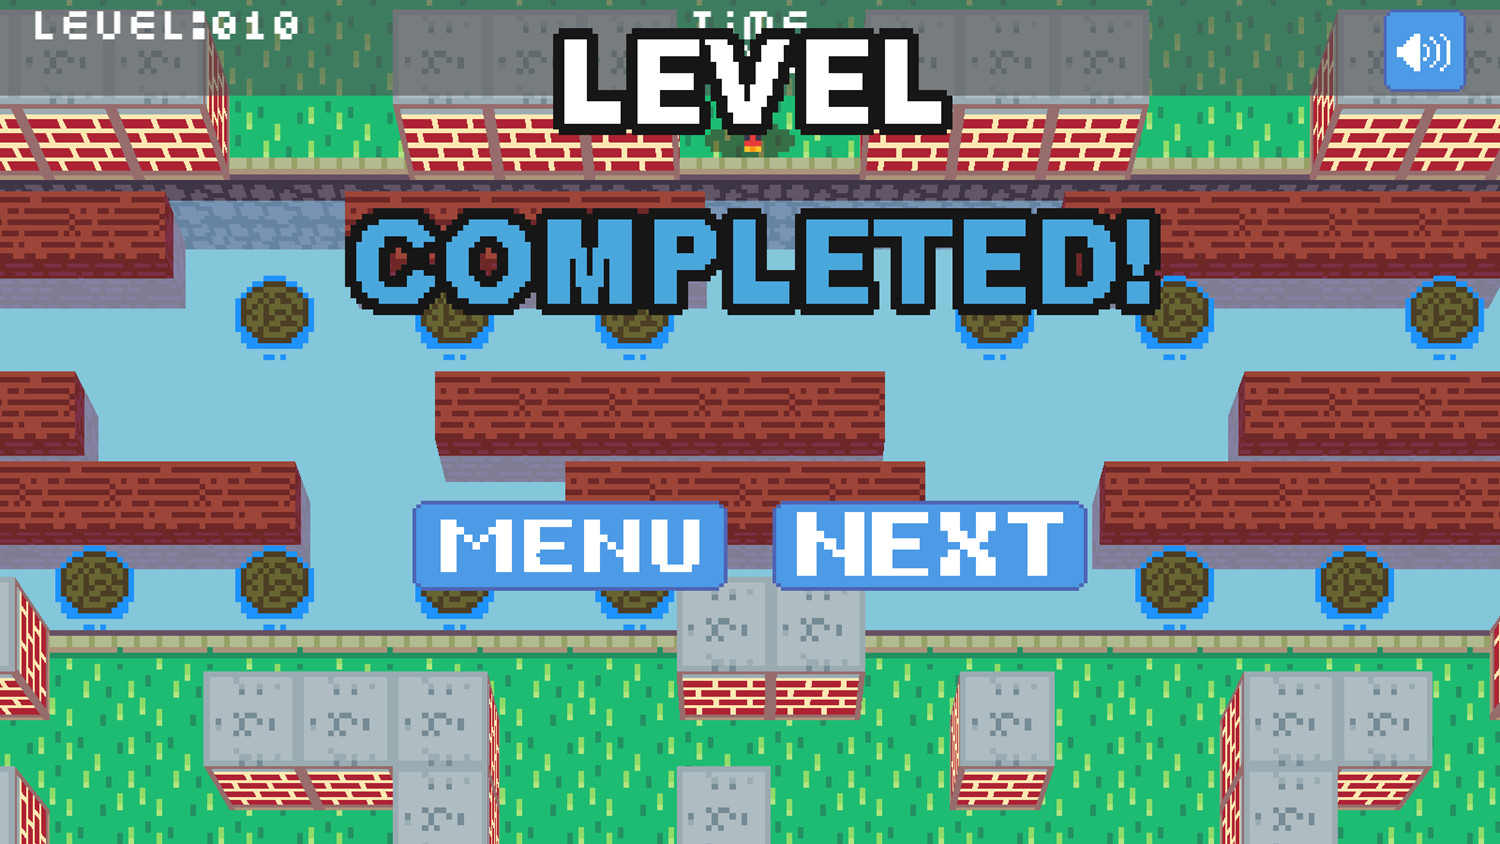 Chicken Cross The Road Game Level Completed Screen Screenshot.